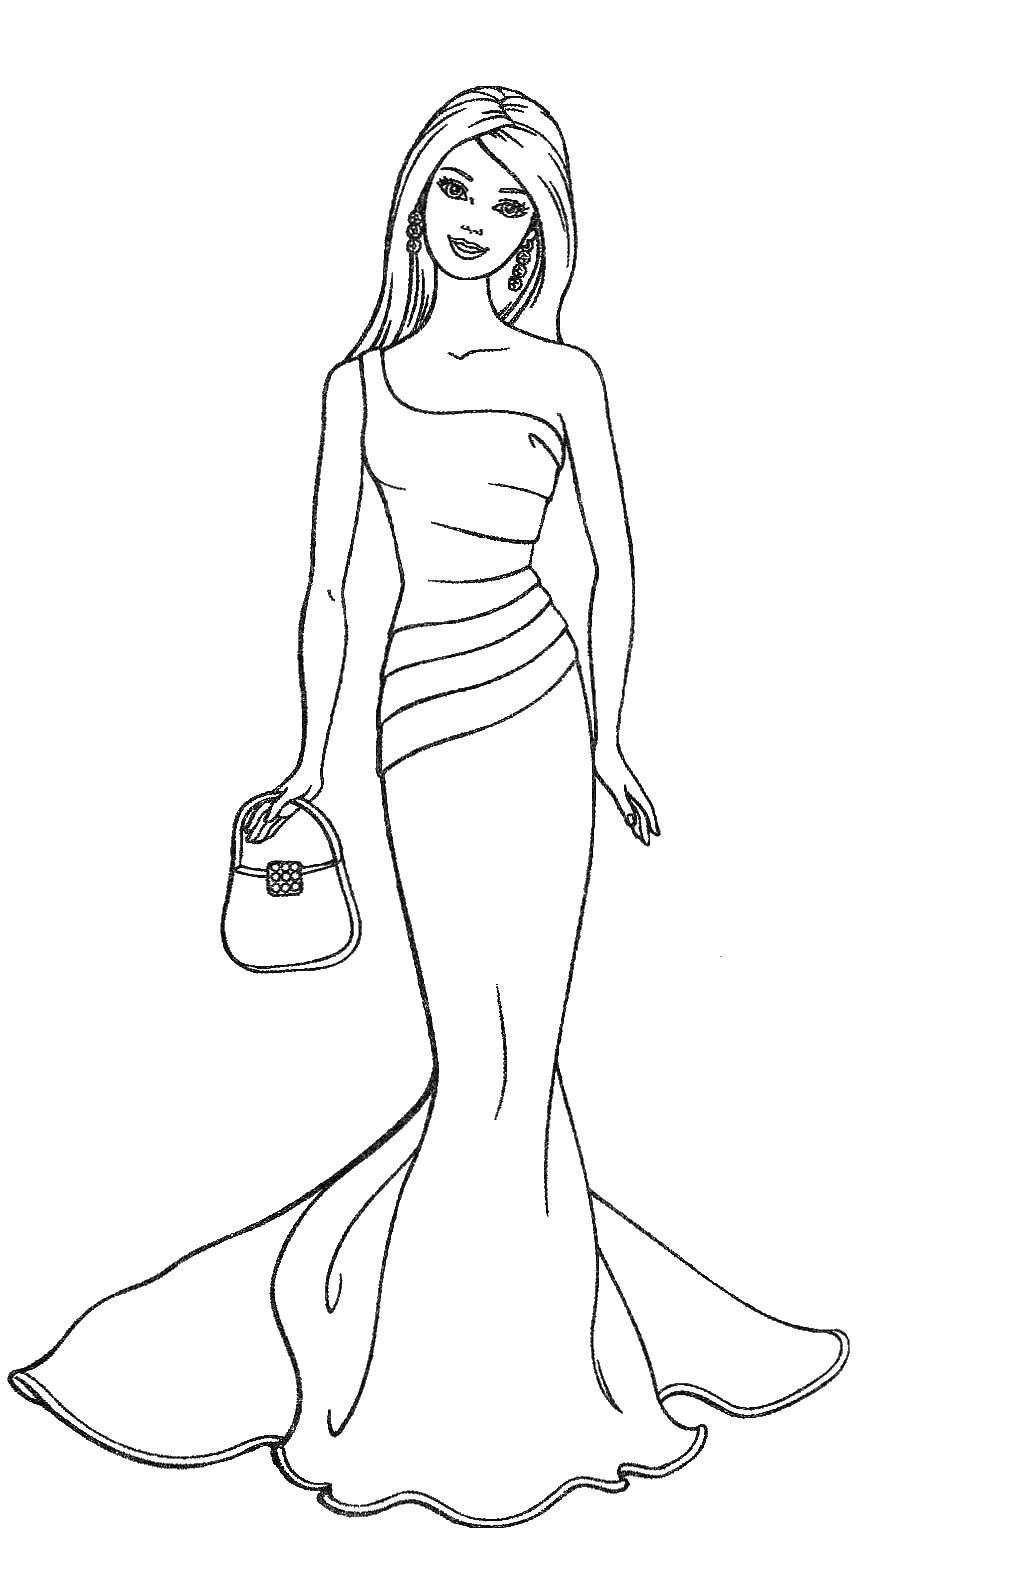 Coloring Barbie is going tonight. Category Dress. Tags:  Clothing, dress.